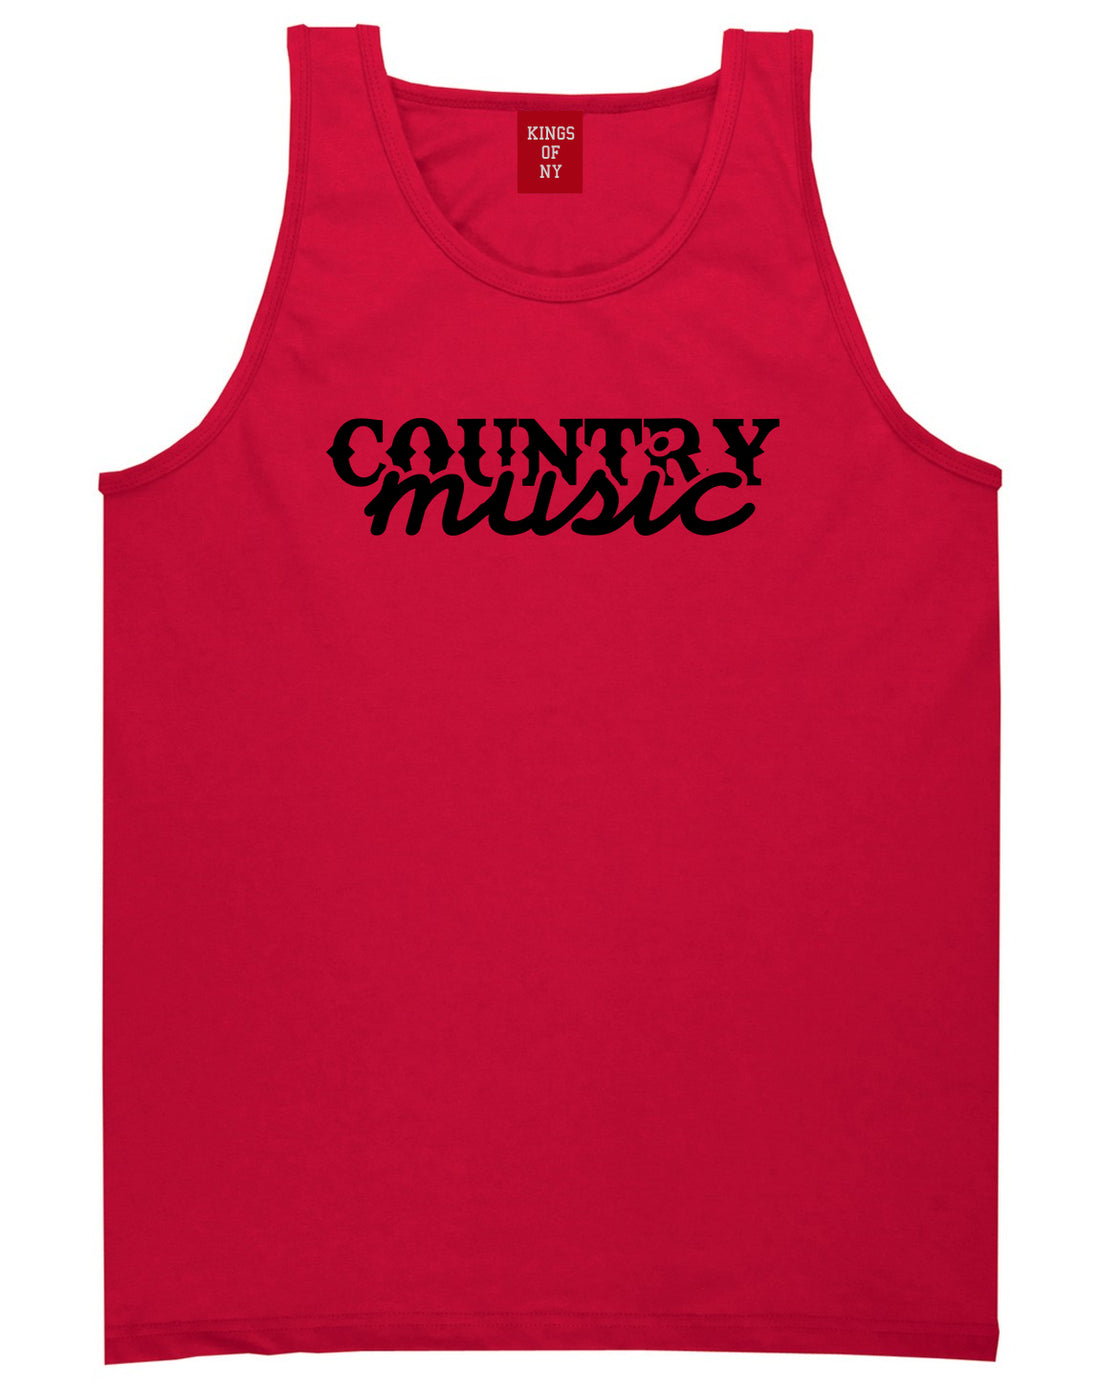 Country Music Red Tank Top Shirt by Kings Of NY